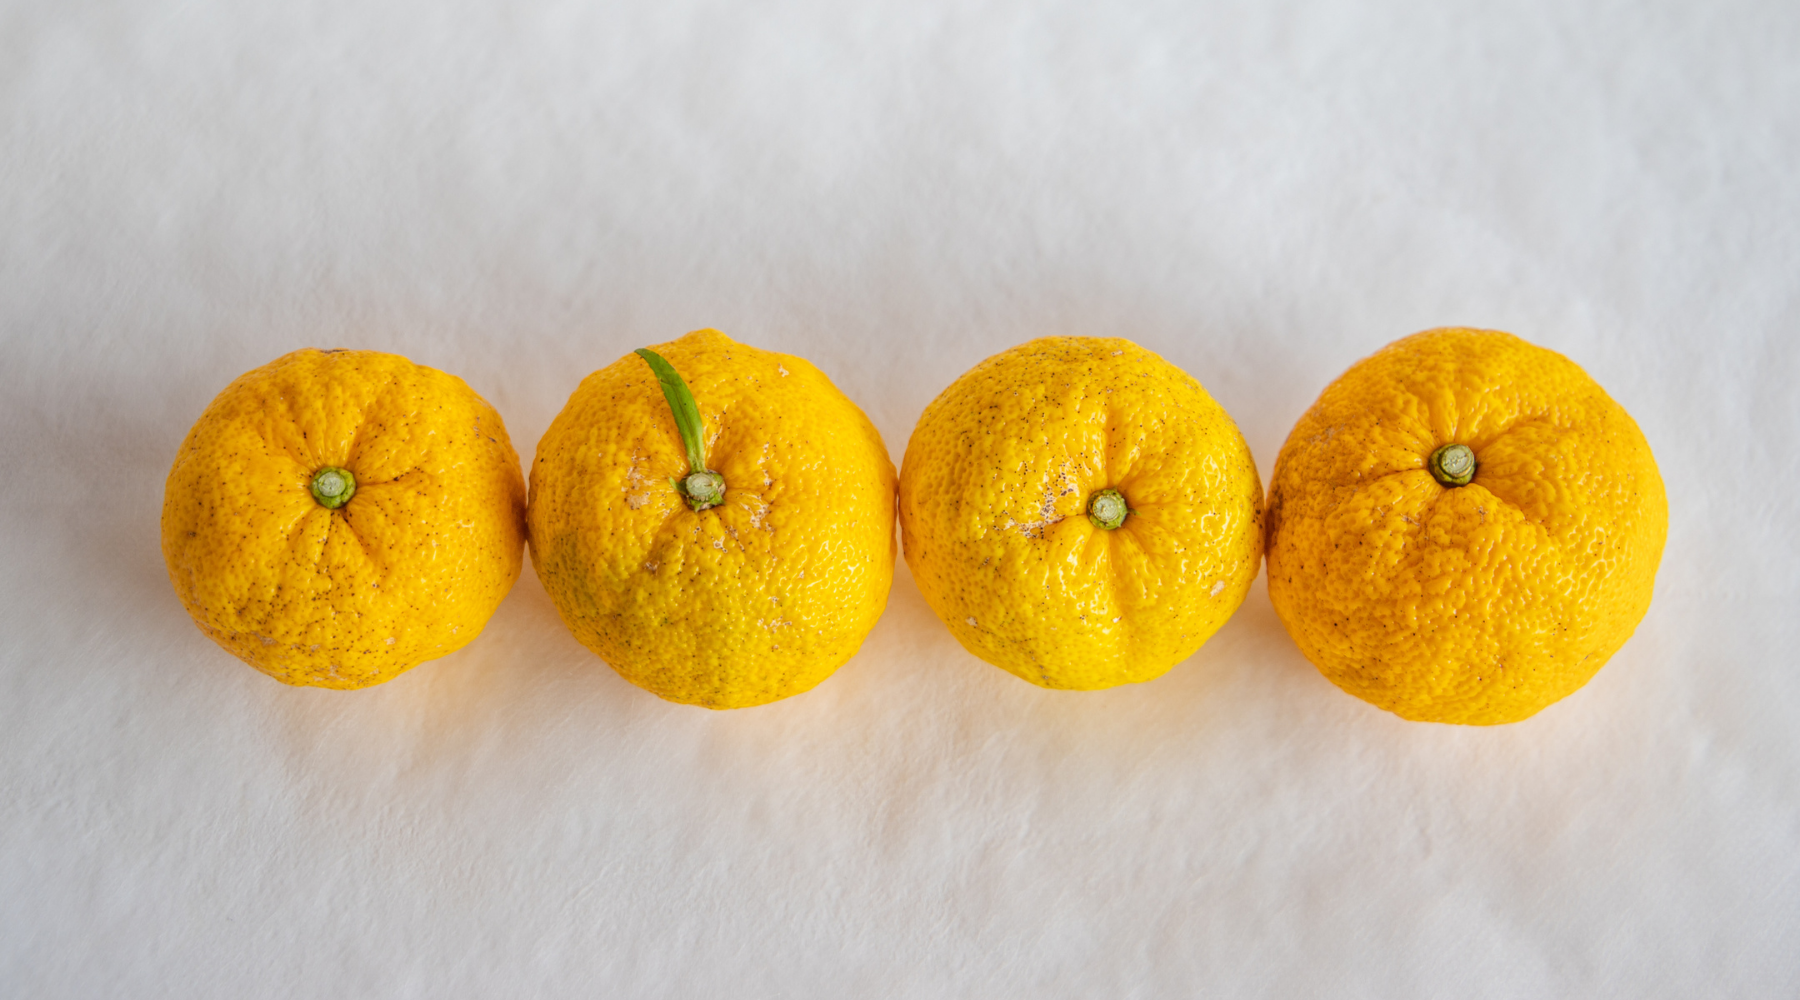 Four yuzu fruits placed horizontally in a line